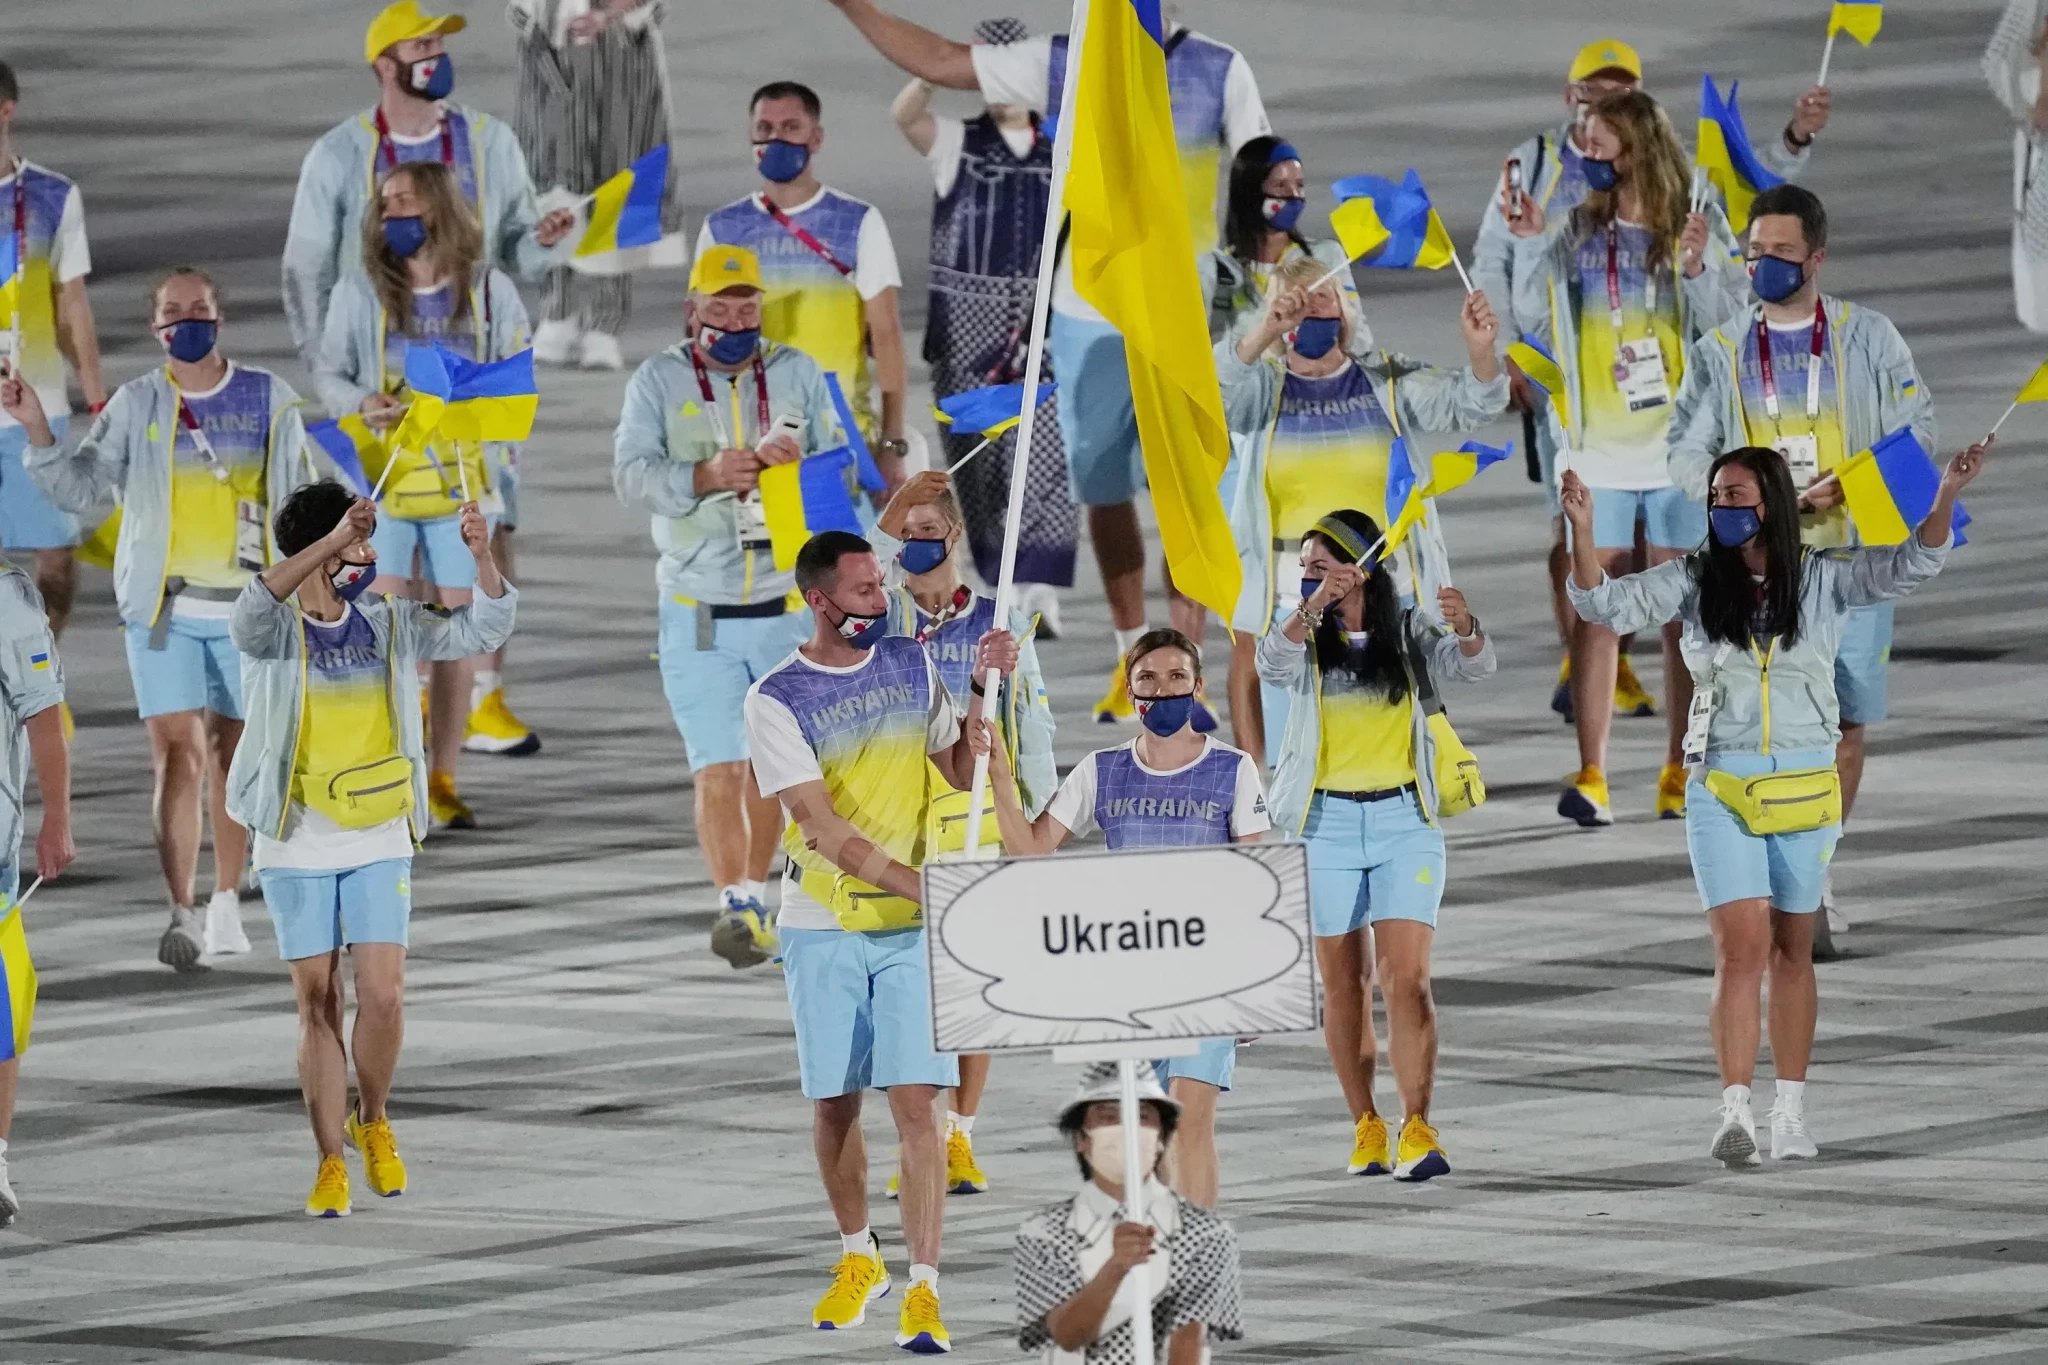 Ukrainian Government athlete funding threat "a step too far", warns IOC official